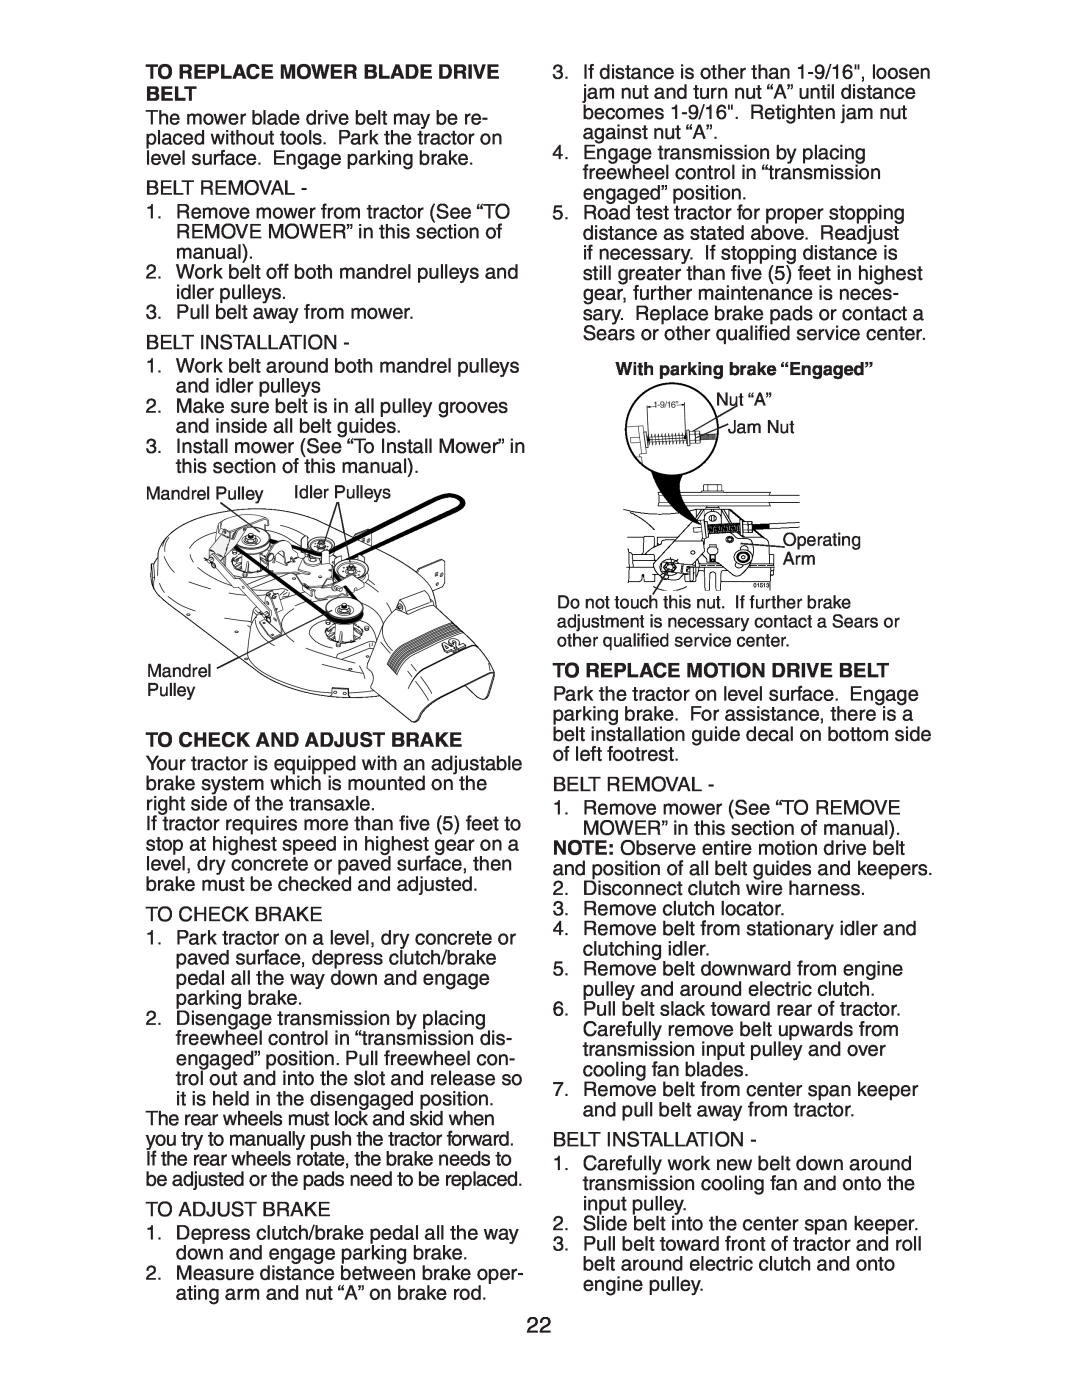 Poulan 193282 manual To Replace Mower Blade Drive Belt, To Check And Adjust Brake, To Replace Motion Drive Belt 